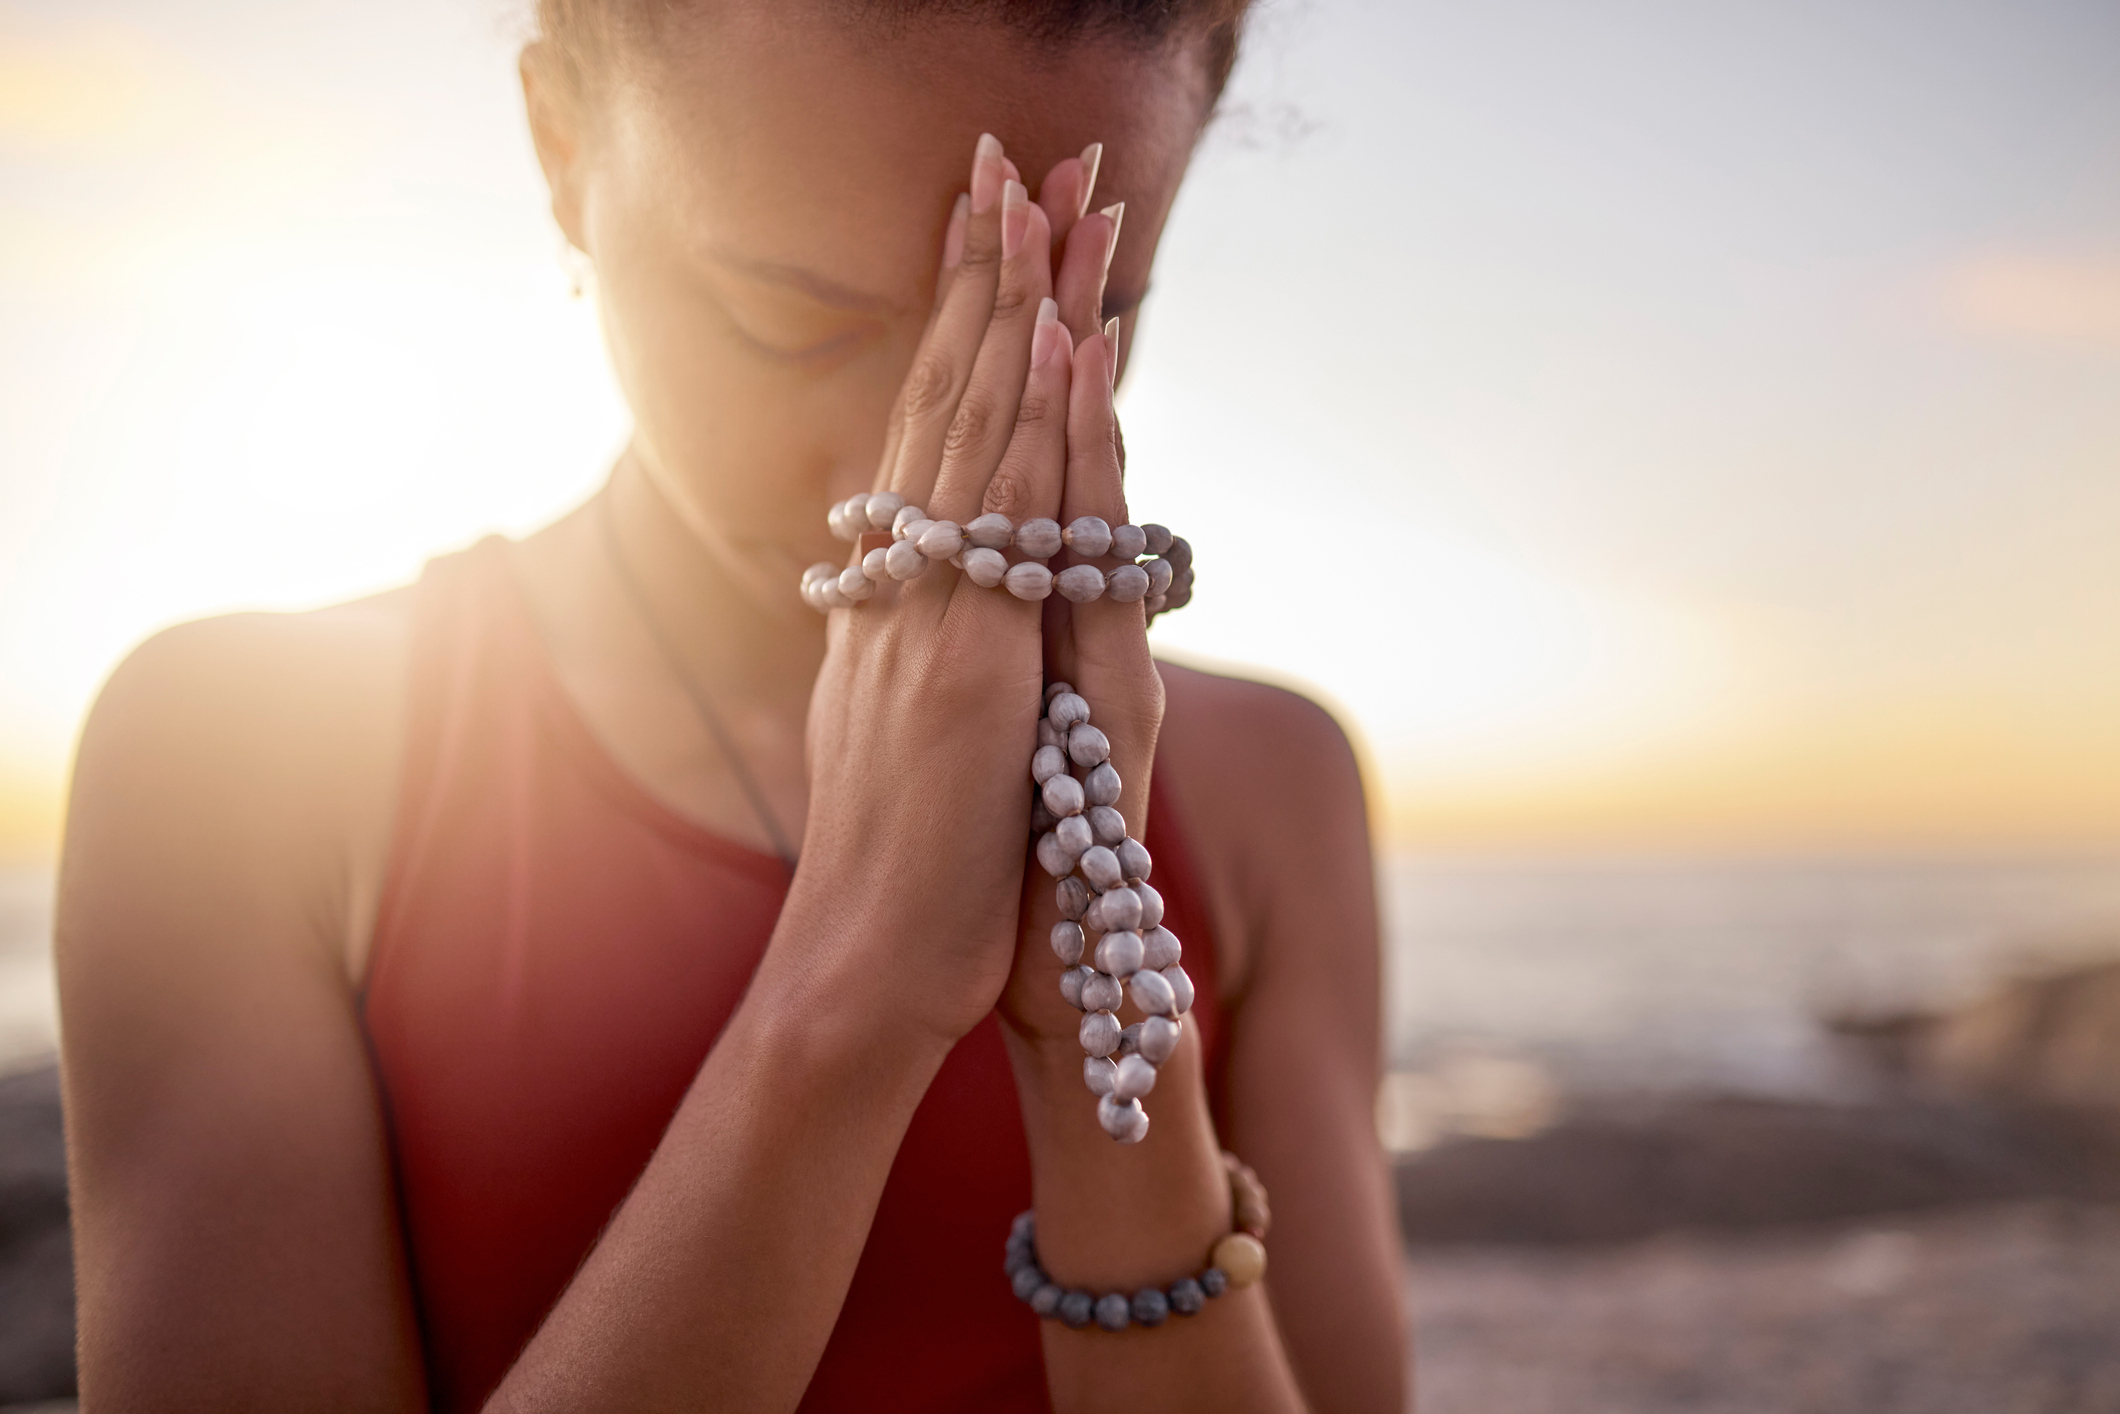 Prayer beads can be a valuable addition to your mindfulness practice.
